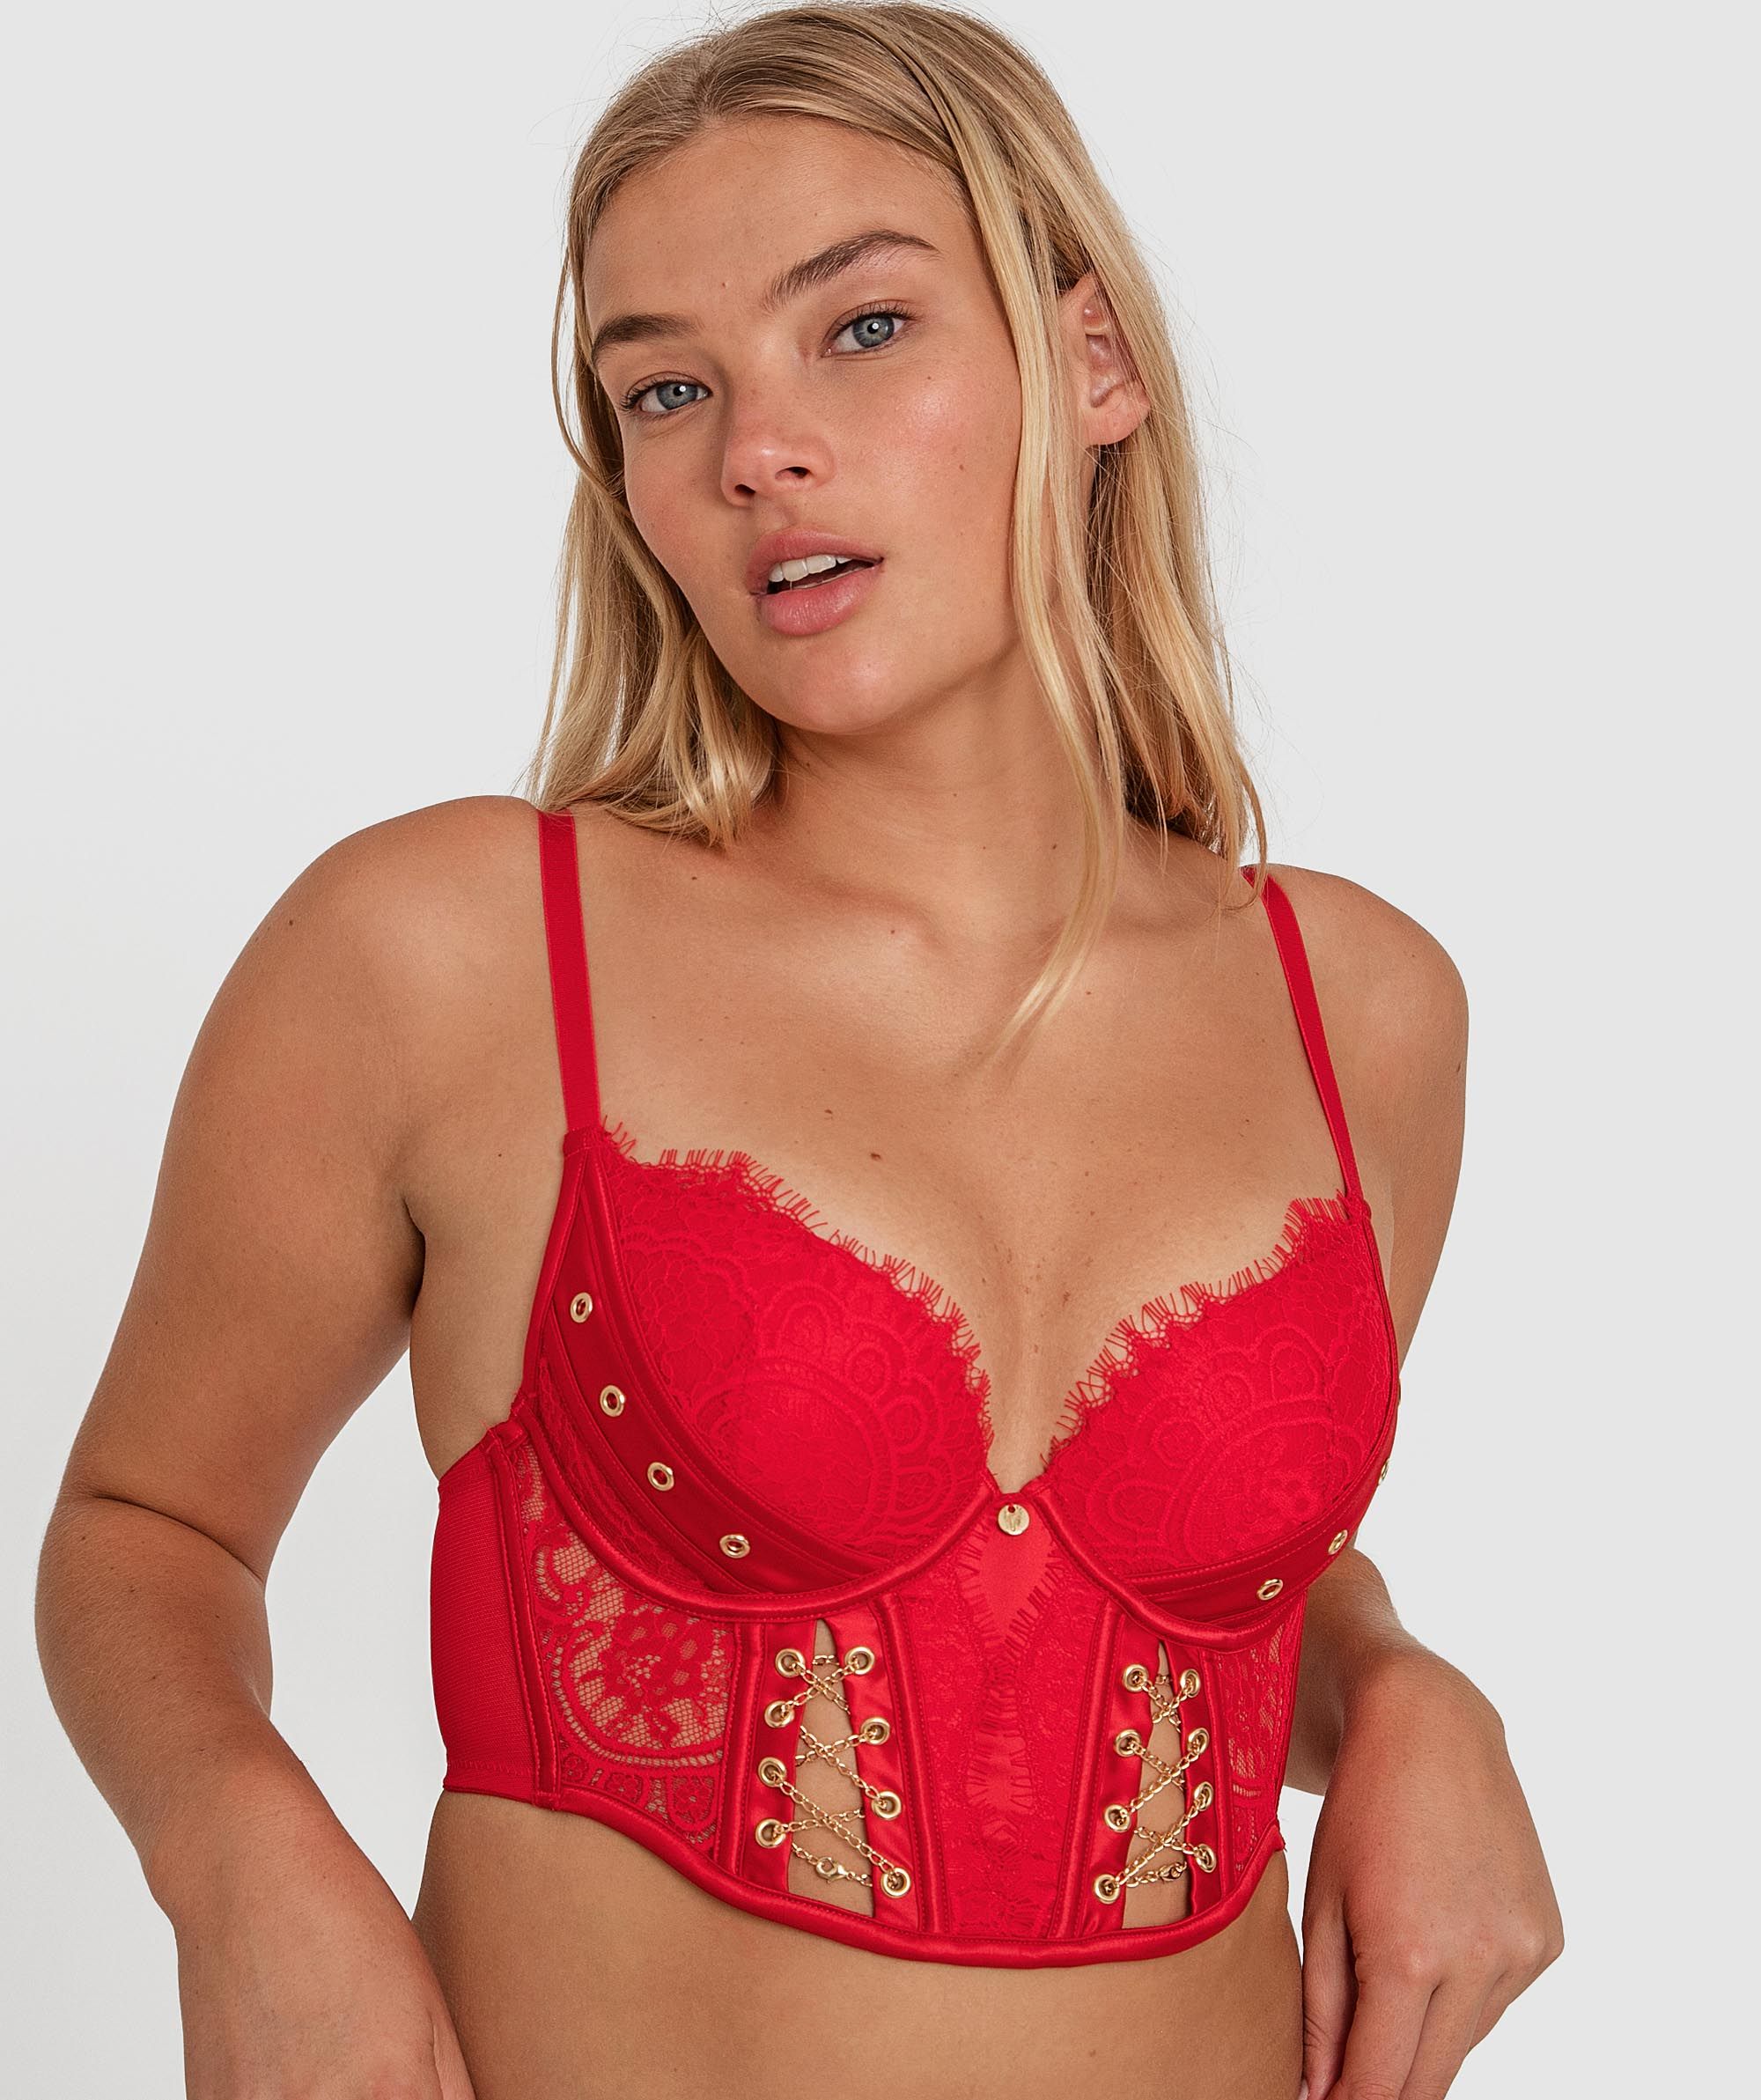 Bras N Things - Front to back! The Front Closure Bra just got sexy! # brasnthings